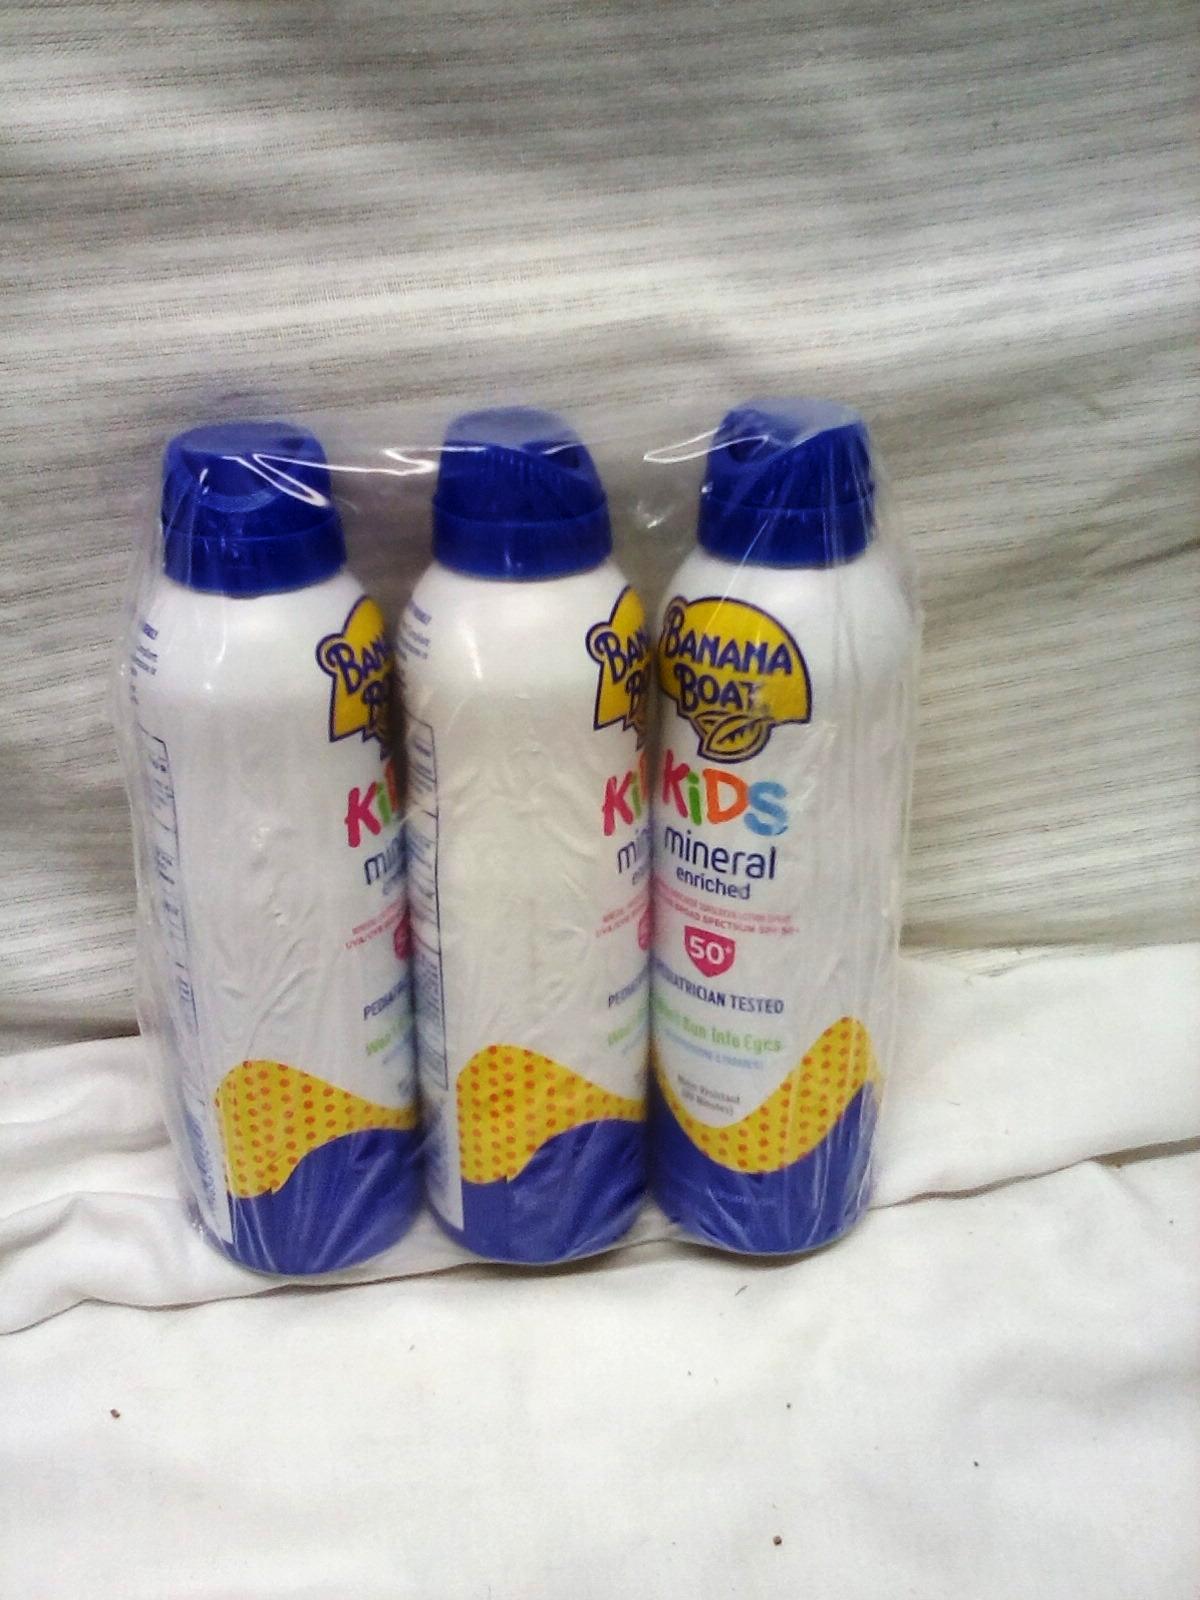 Qty. 3 Banana Boat Kids Mineral Enriched Sunscreen SPF 50+ Water Resistant